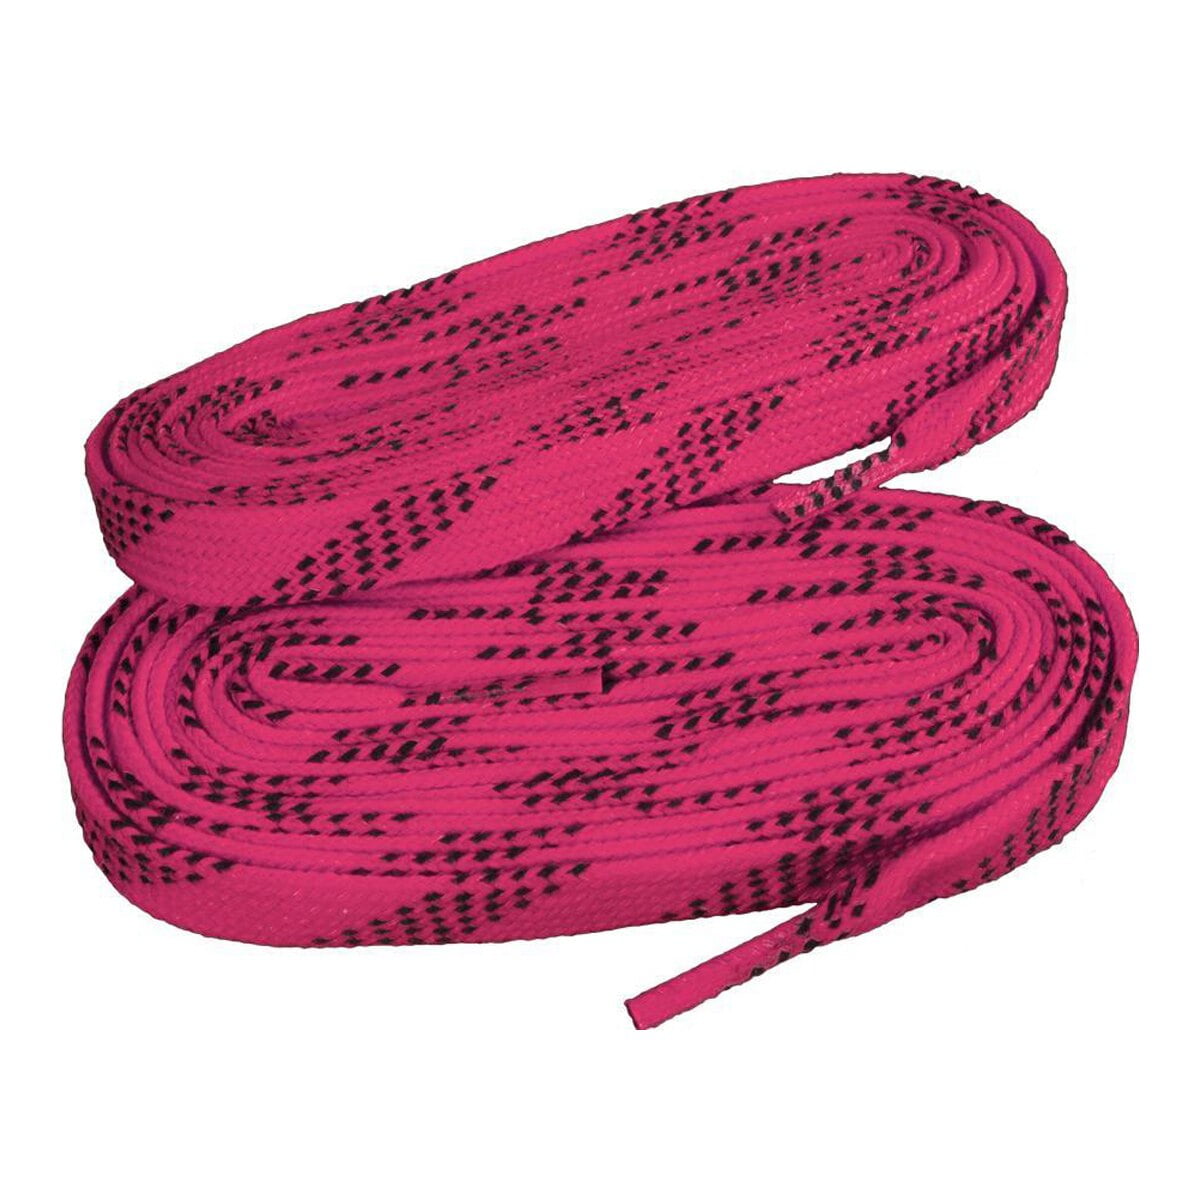 Elite Hockey Prolace Waxed Skate Laces Pink/Navy, 84 IN 